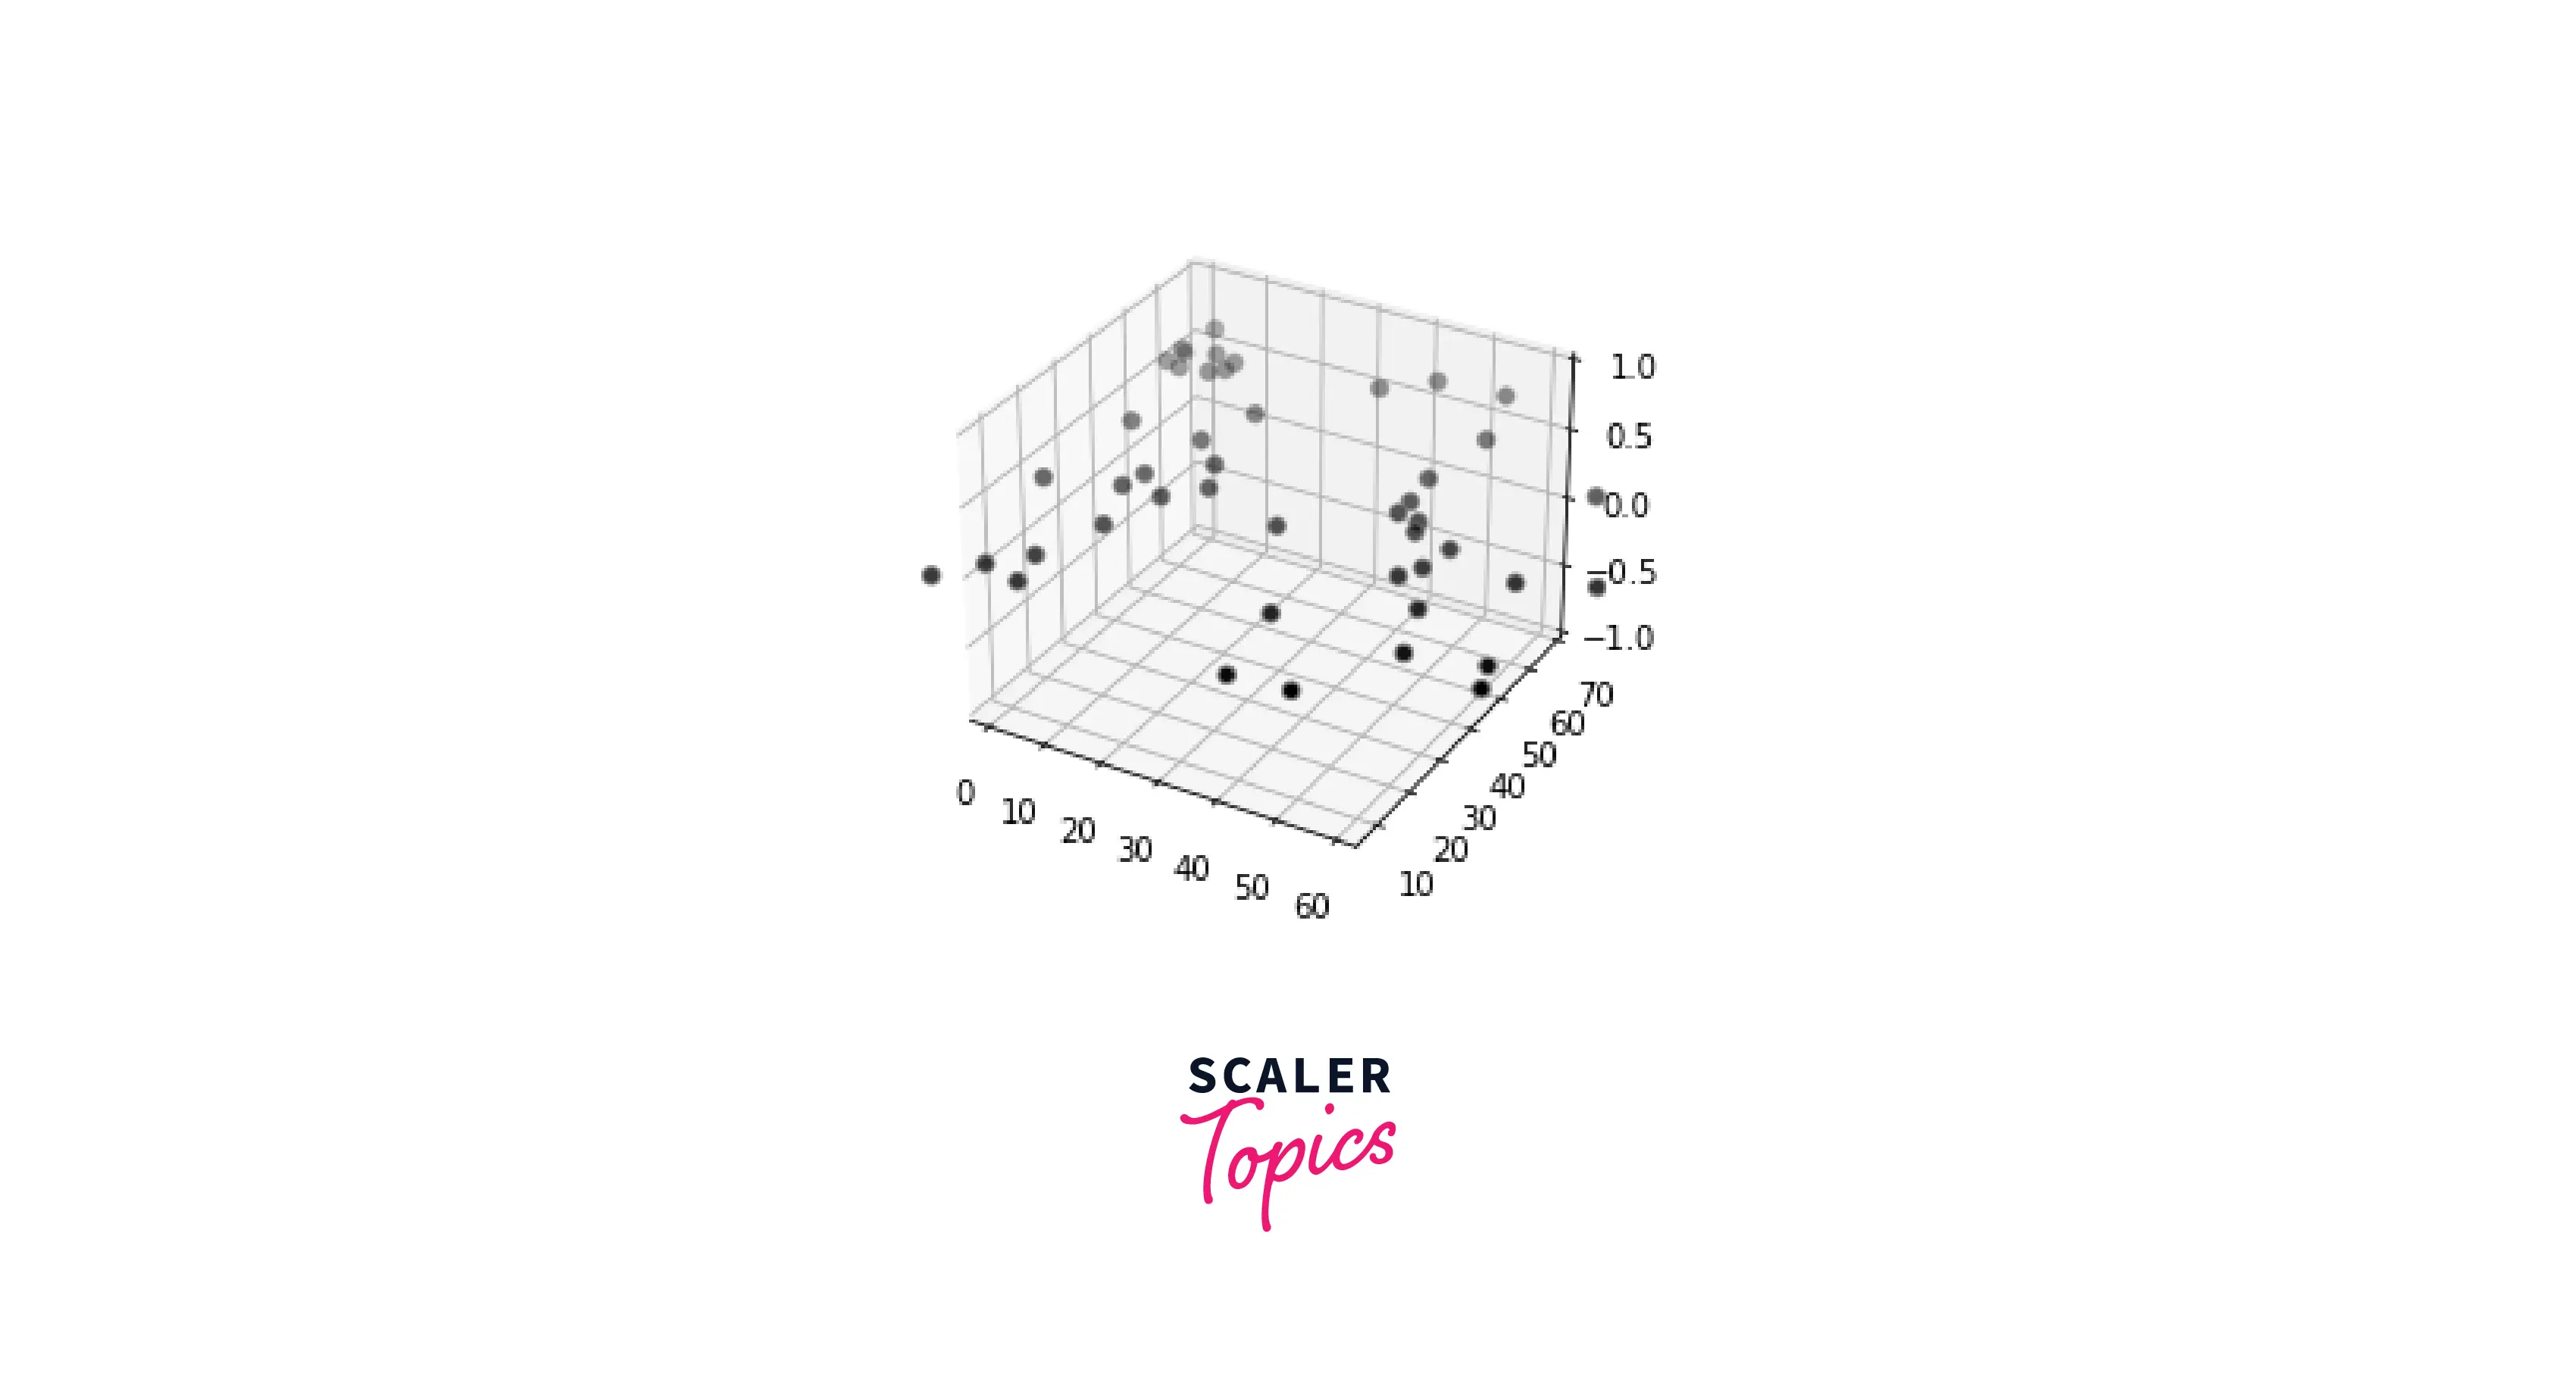 output-set-range-of-axes-of-3d-scatter-plot